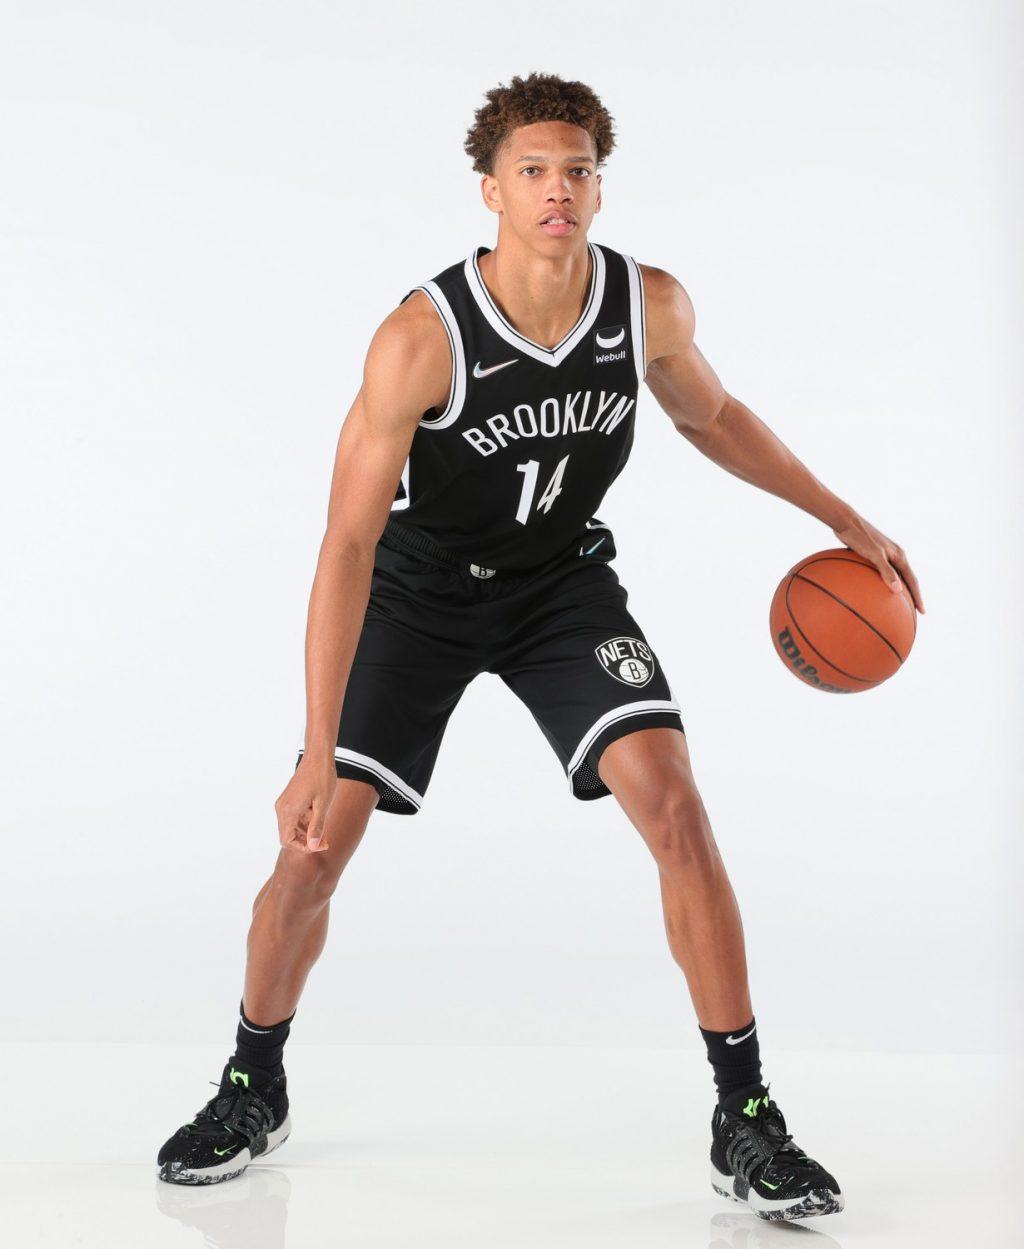 Edwards poses for a picture during the Brooklyn Nets Media Day on Sept. 27, 2021. Edwards has played in 34 games for the Brooklyn Nets so far this season. Photos courtesy of Nathaniel S. Butler via Getty Images